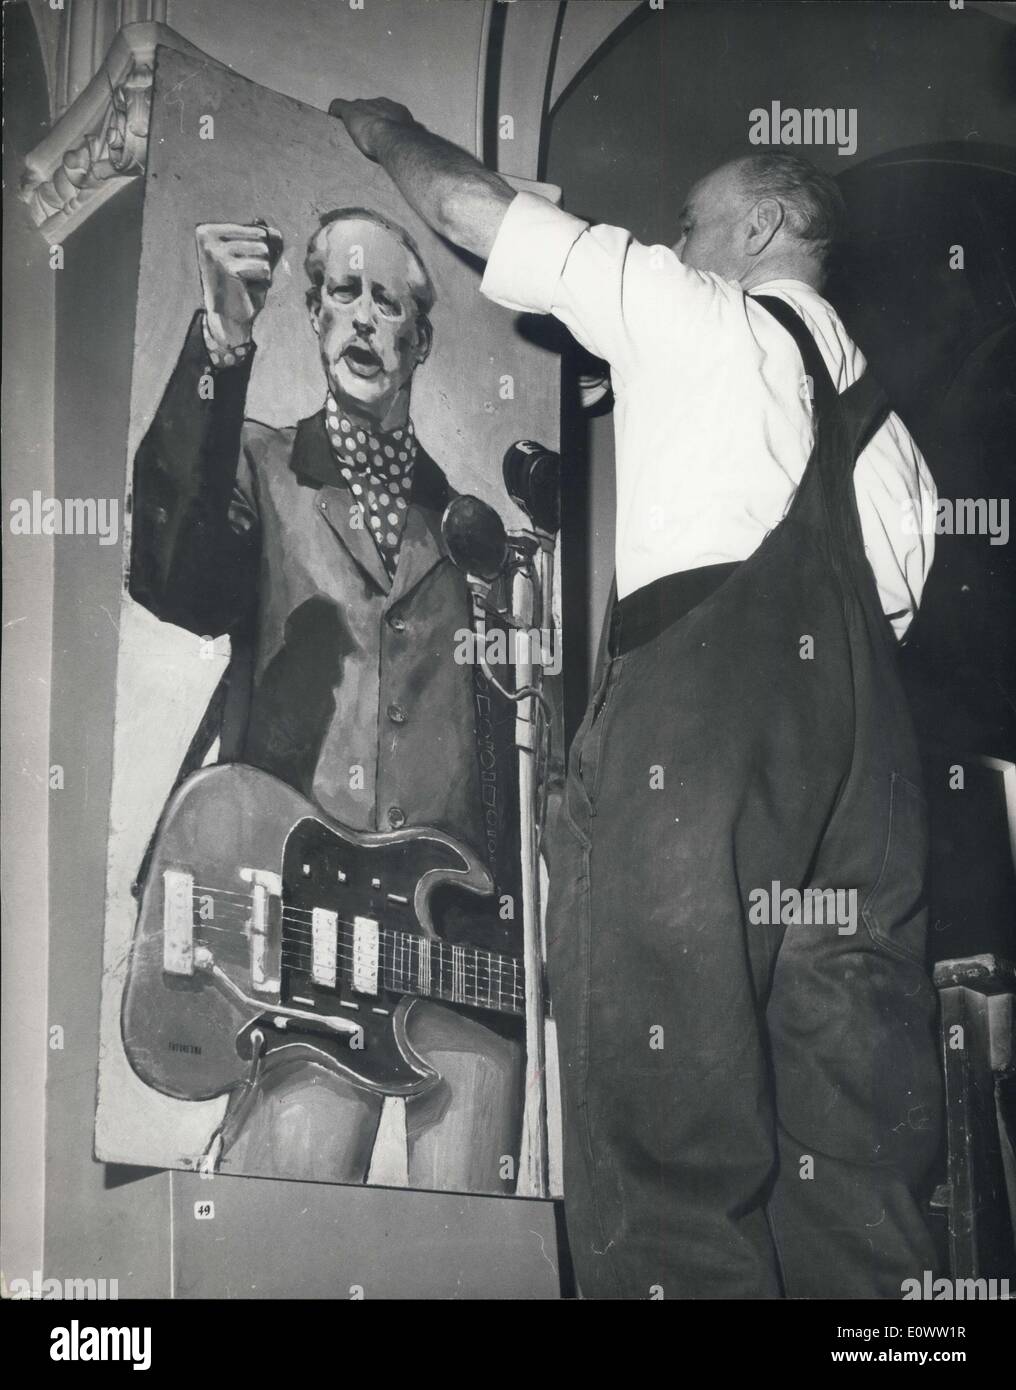 Apr. 22, 1964 - ''Mac the Mod'' ..... Ex-Premier Becomes A Beatle: Quite a stir has been caused in the ranks of the Tory party by the appearance in the East London Festival of Art, at Walthamstow, of a painting by 20 year old art student Petter Weevers, of former Prime Minister Harold MacMillan wearing a high-necked polka dot shirt, and a leather jacket, holding a Beatle type guitar. Some tories have referred to it as ''disrespectful'', but others think it rather amusing. Photo shows The painting of Harold MacMillan is hung at the East London Festival of Art today. Stock Photo